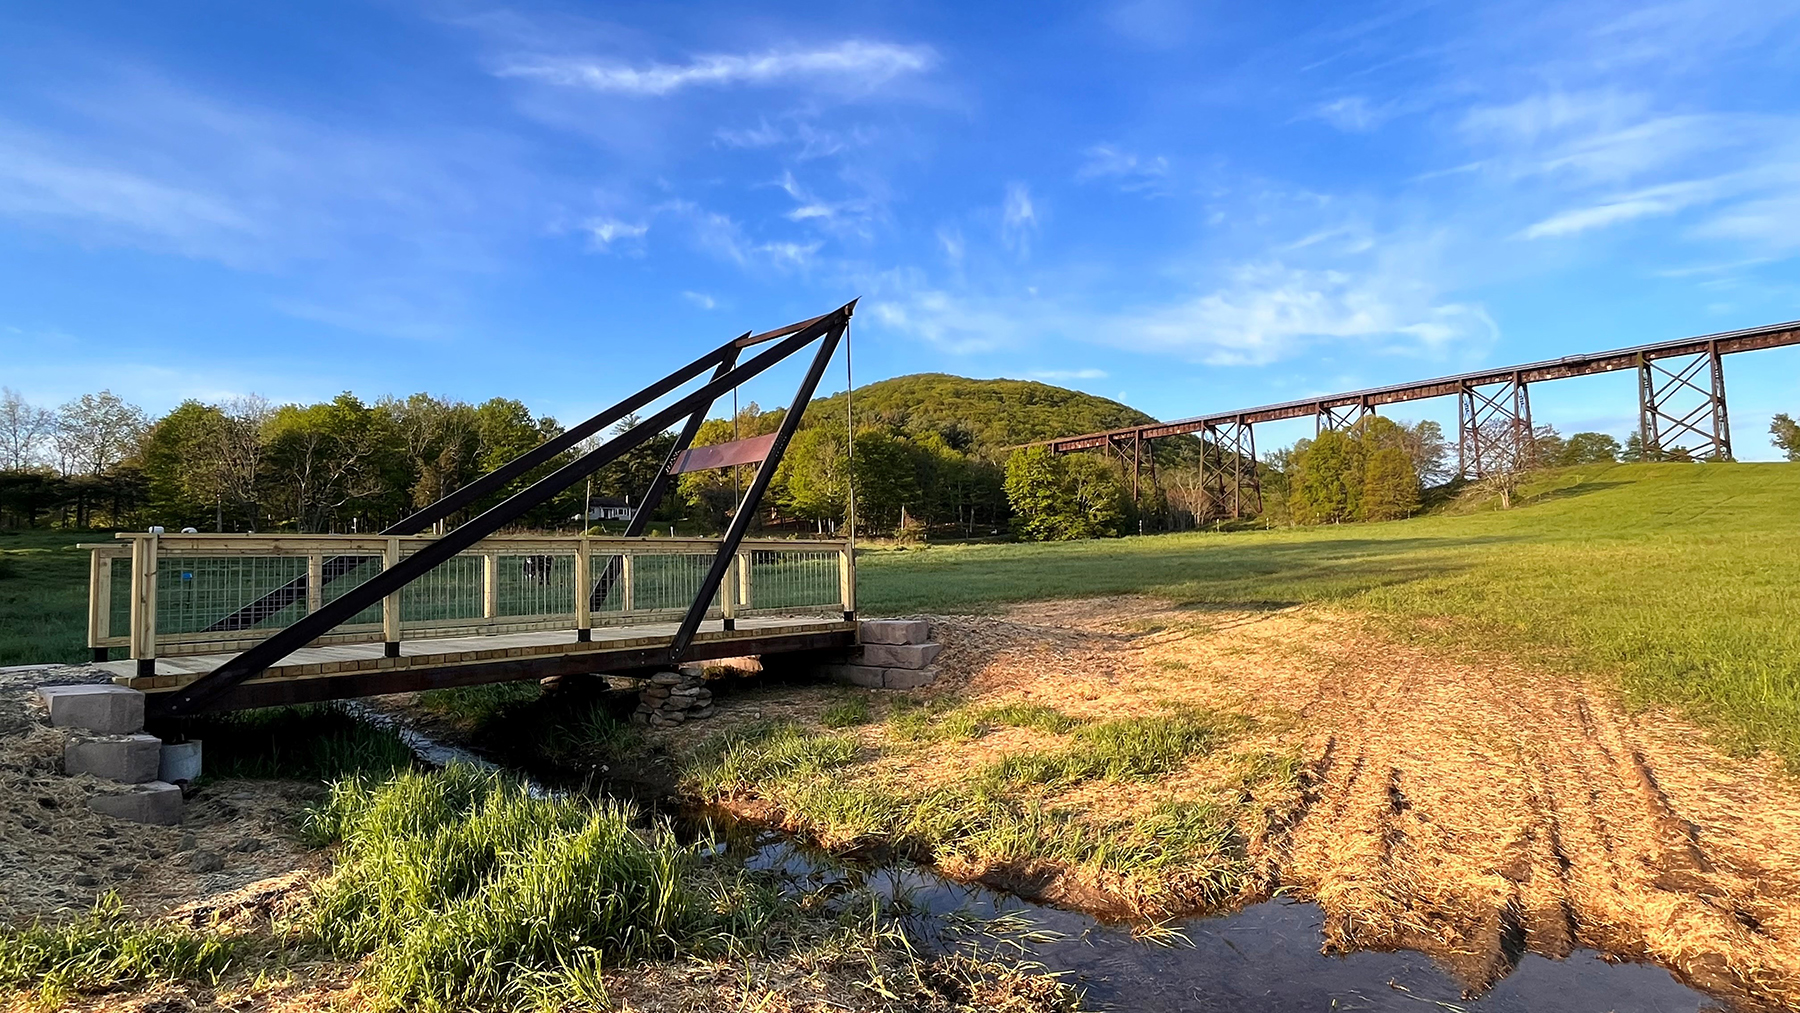 The bridge design was inspired, in part, by the nearby Moodna Viaduct, a historic steel railroad trestle built in 1909. (Photograph courtesy of Open Space Institute)